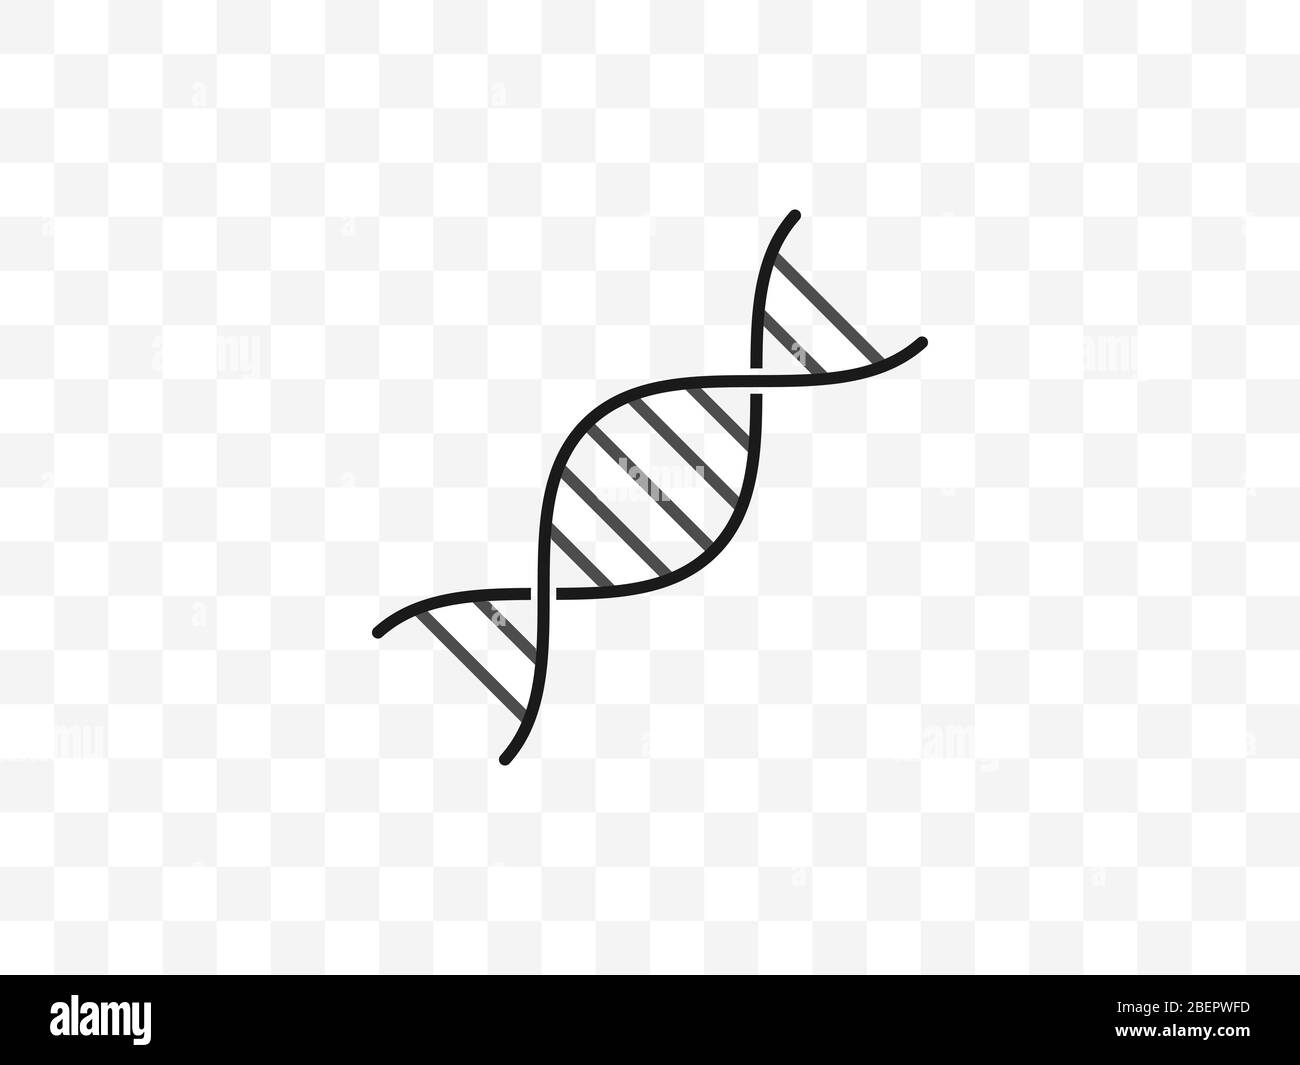 Dna Molecule Black And White Stock Photos Images Alamy